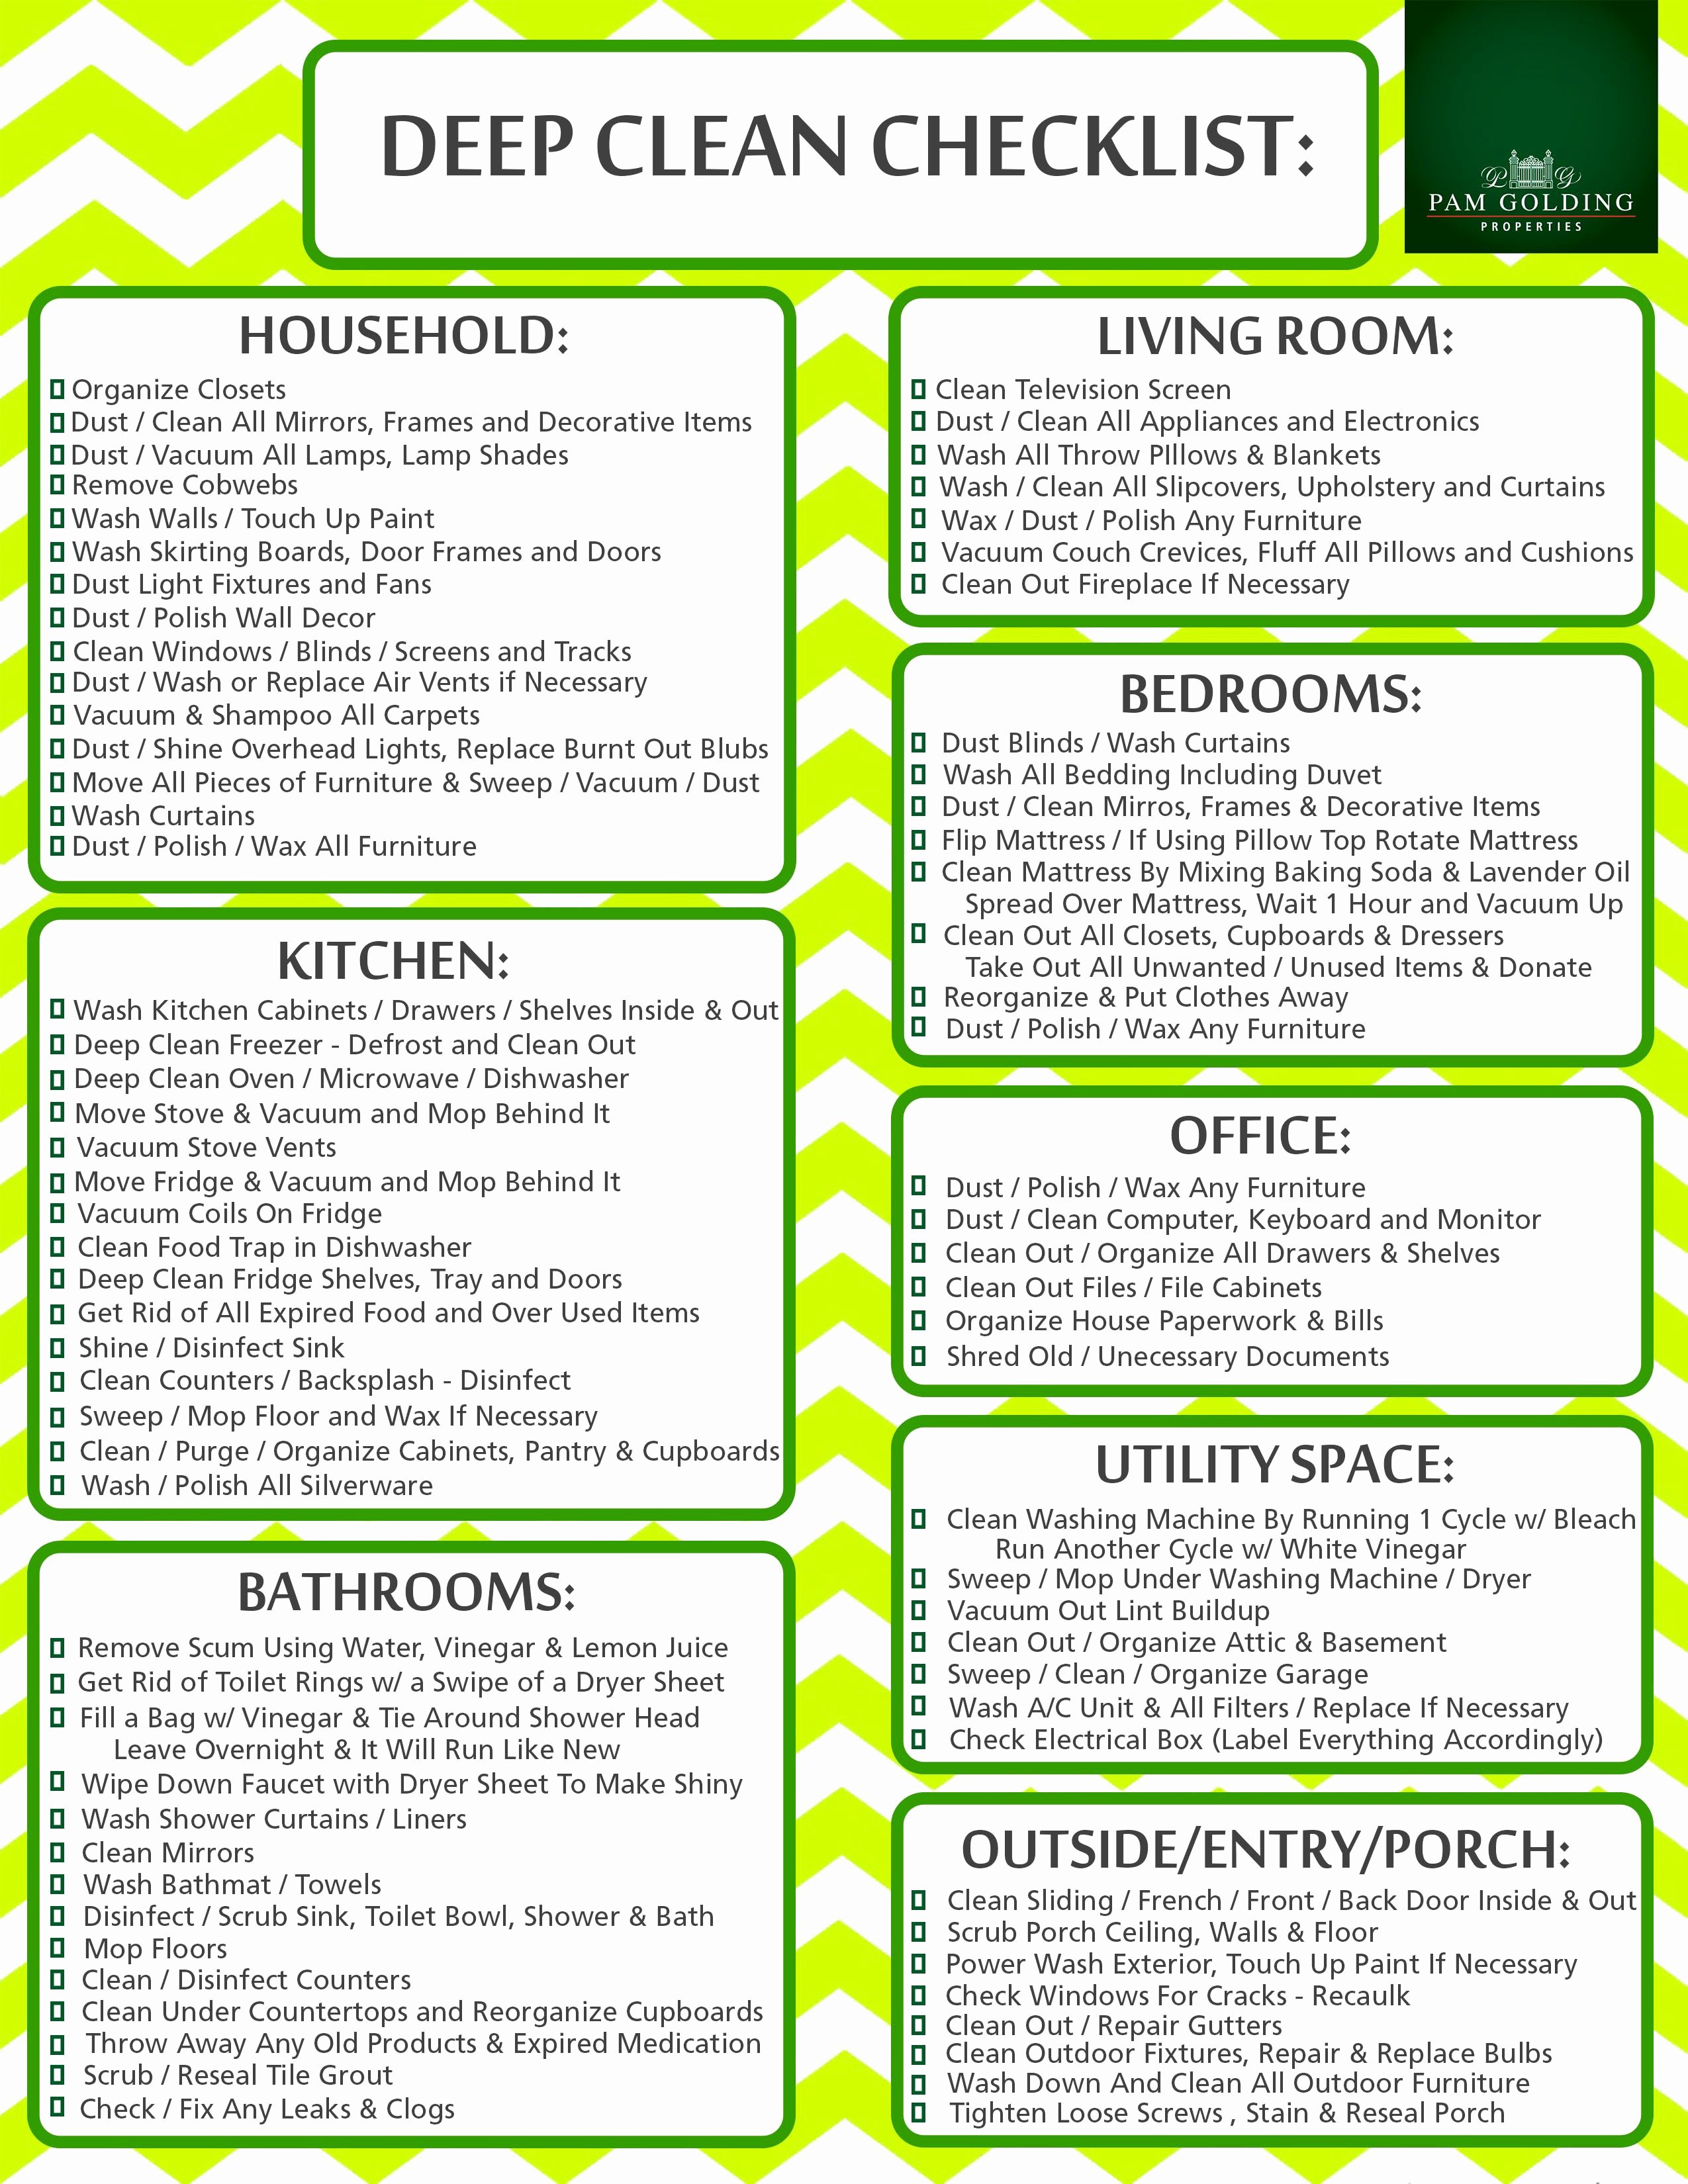 Deep Cleaning Checklist for Housekeeper Unique Click the Image to Print Your Deep Clean Checklist